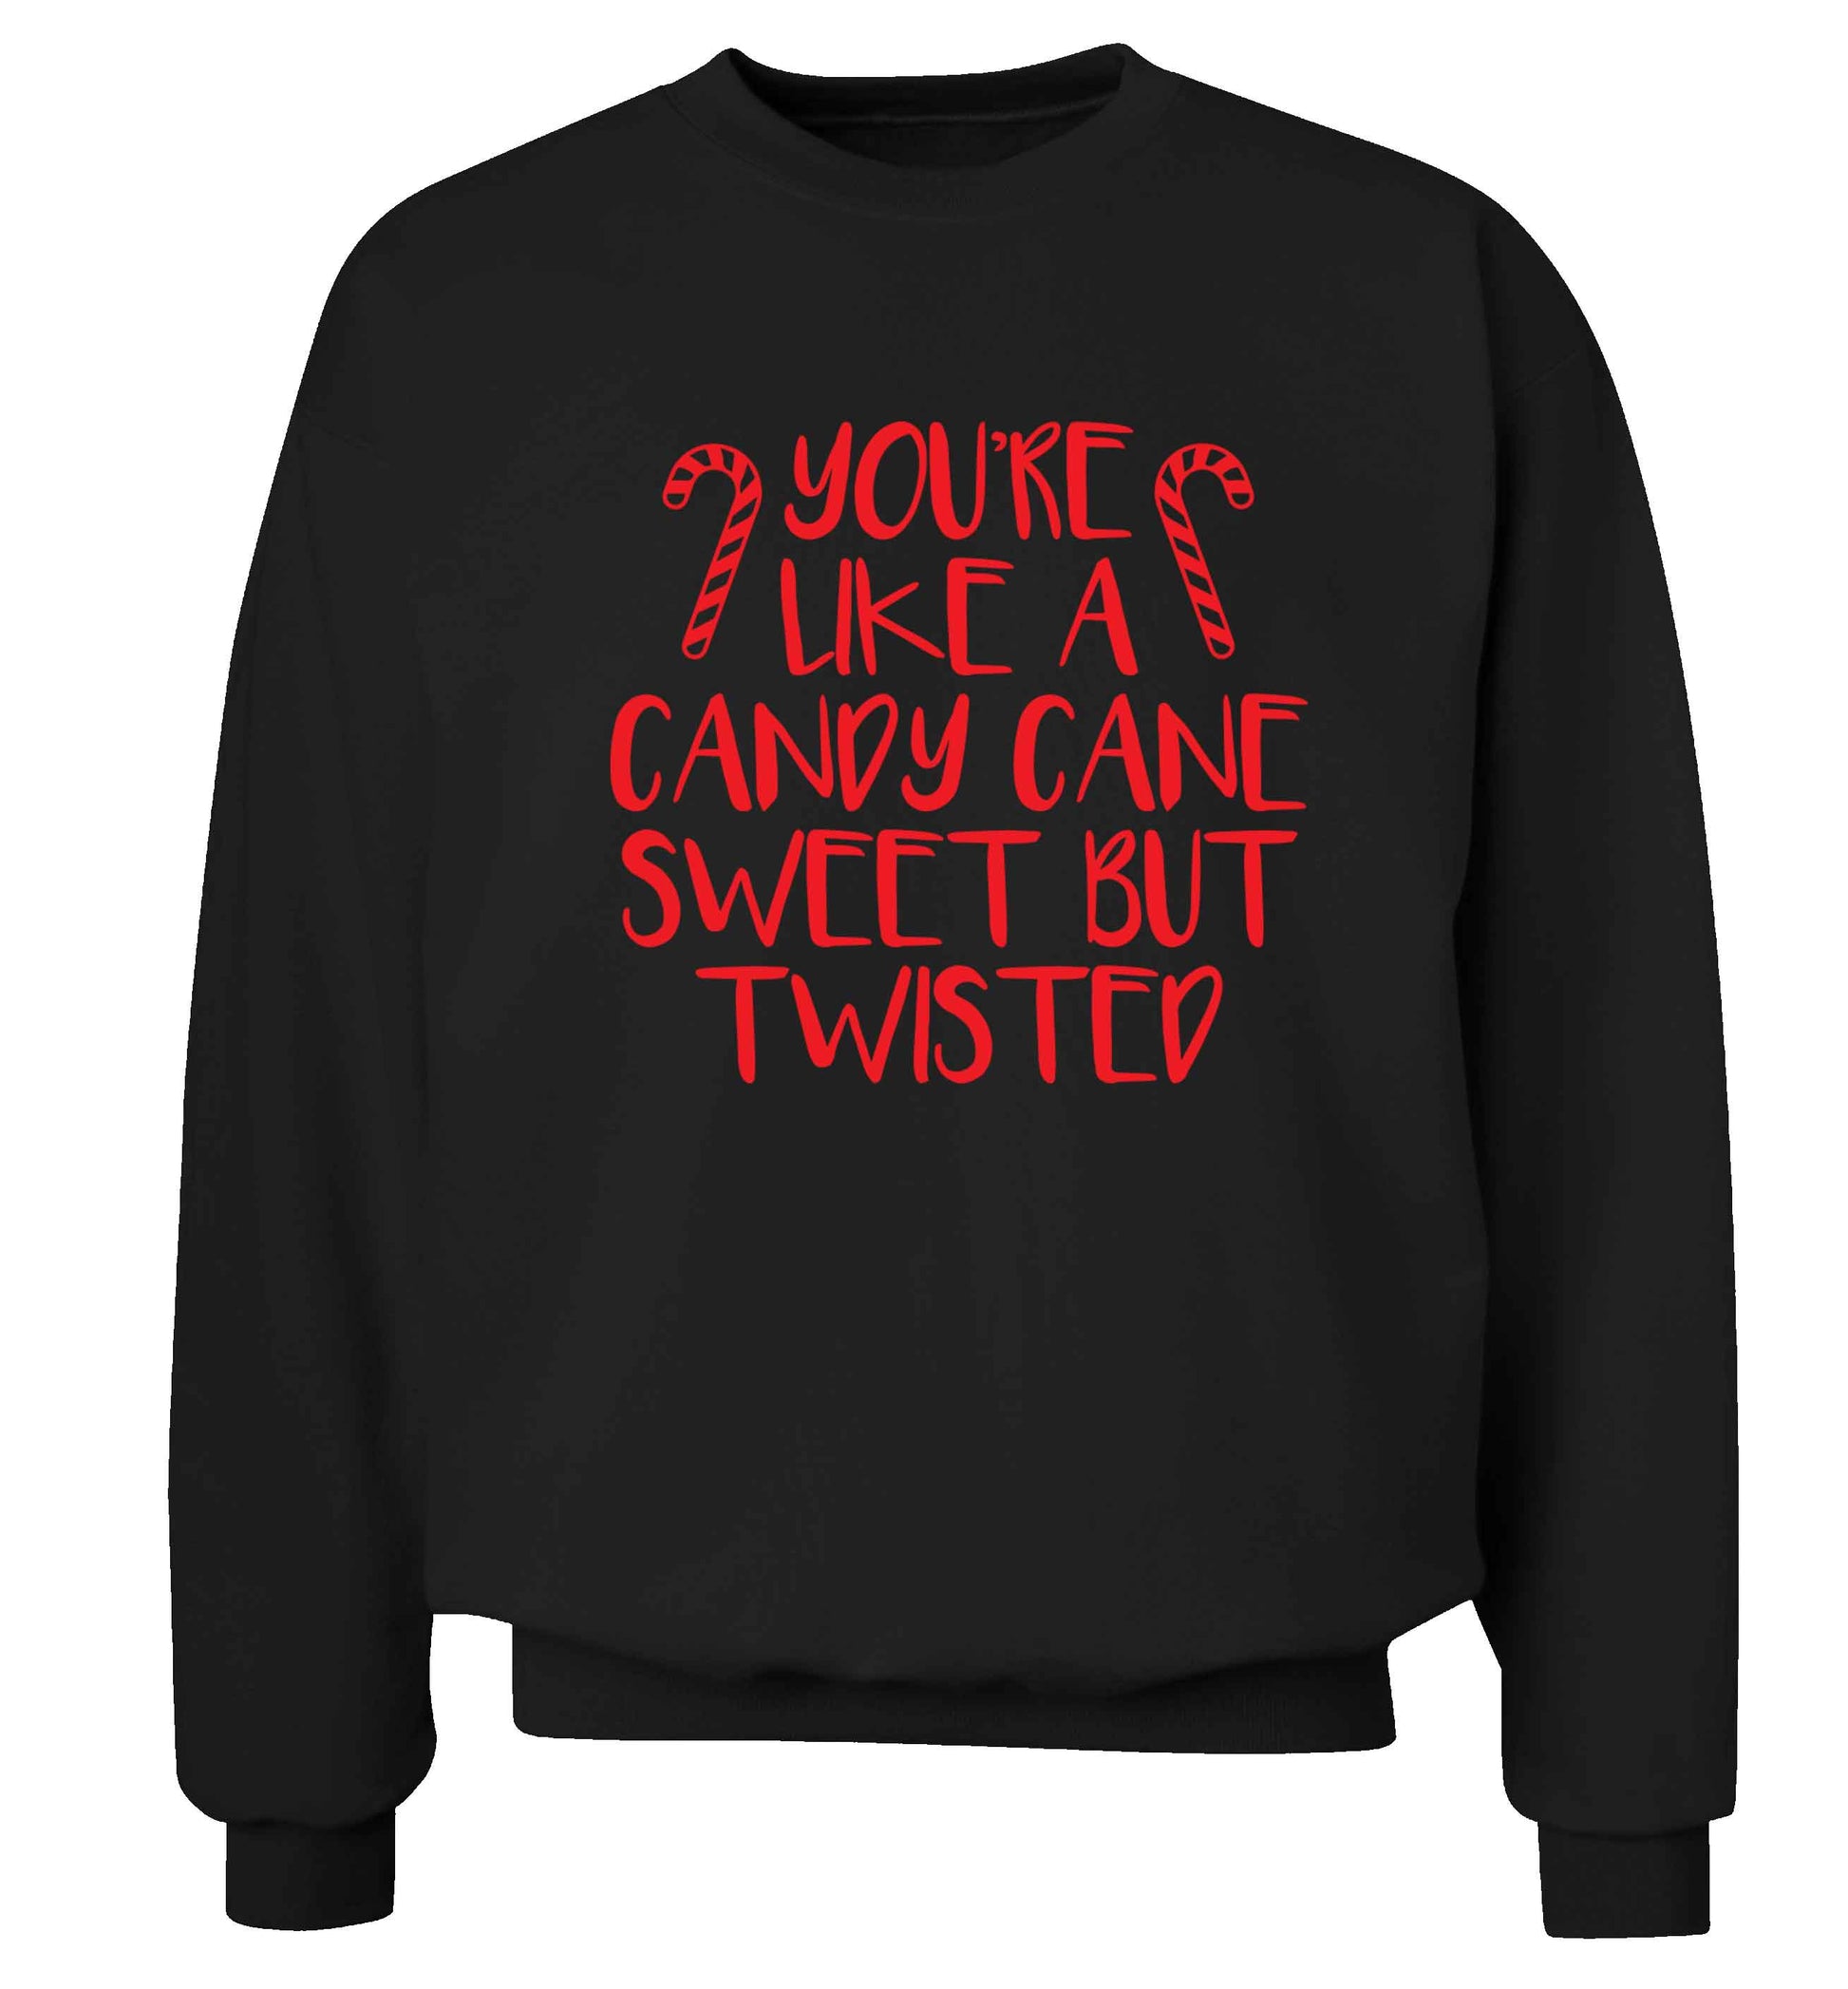 You're like a candy cane sweet but twisted Adult's unisex black Sweater 2XL